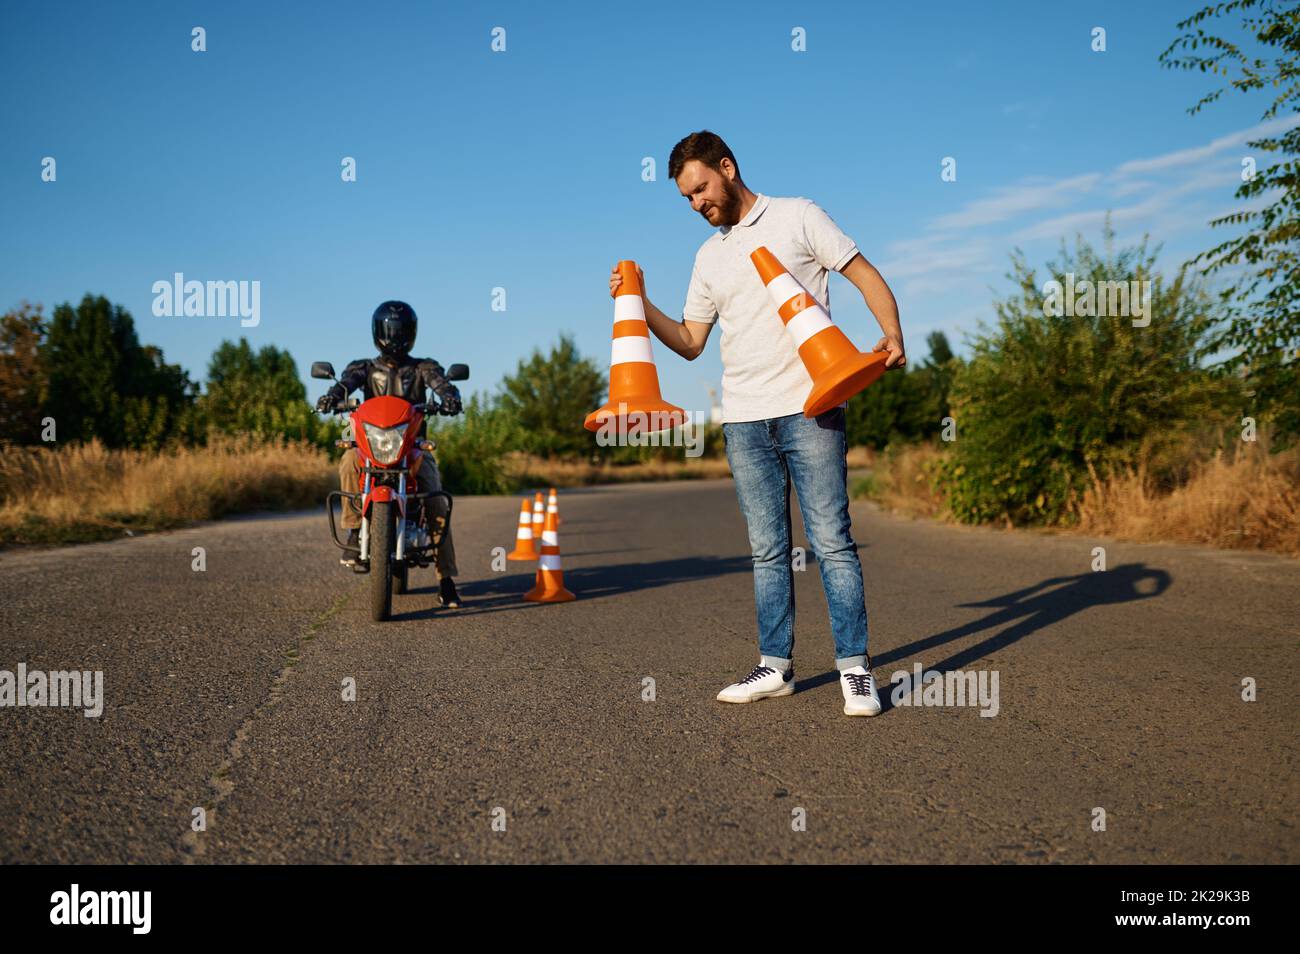 Snake riding between the cones, motorcycle school Stock Photo